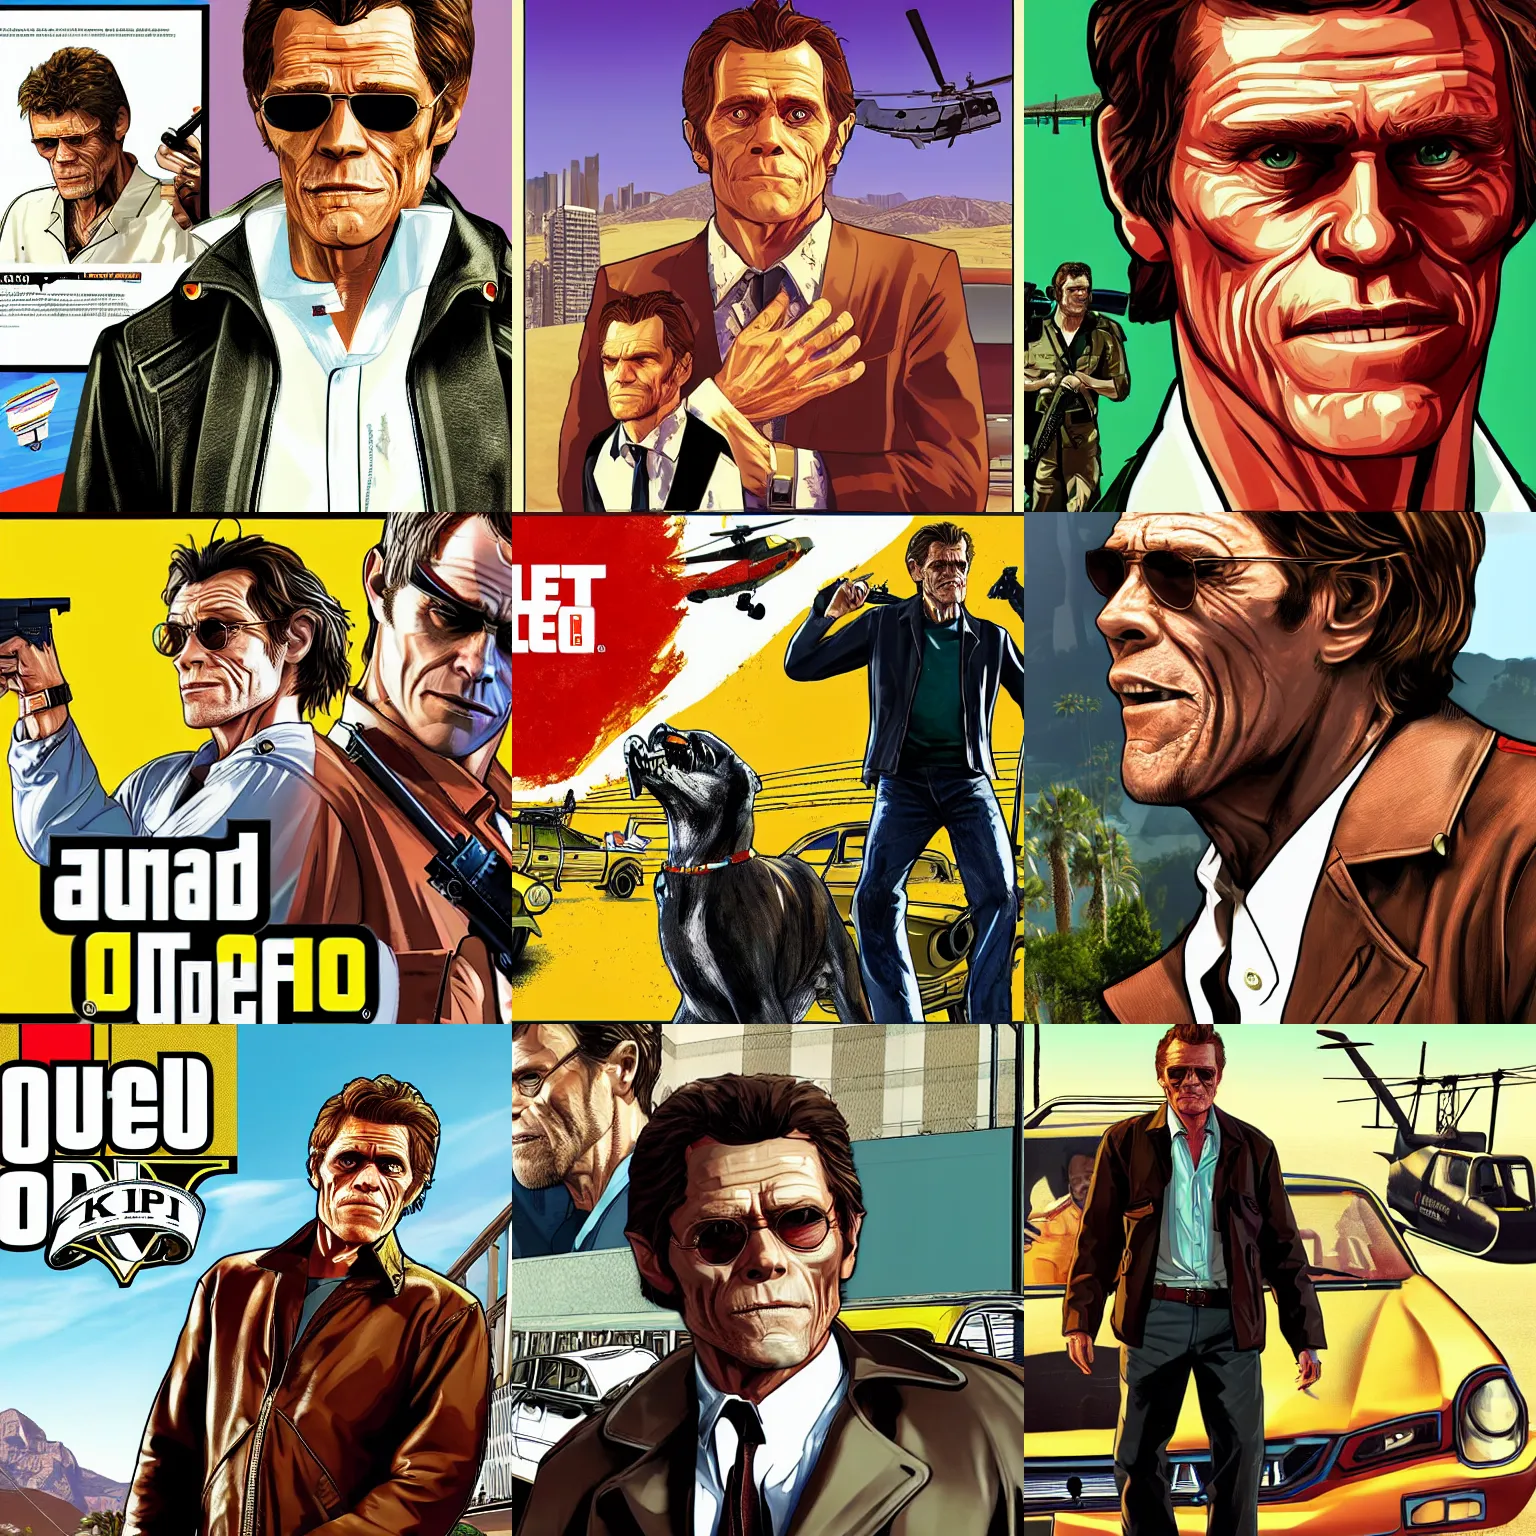 Prompt: willem dafoe in gta v promotional art by stephen bliss, no text